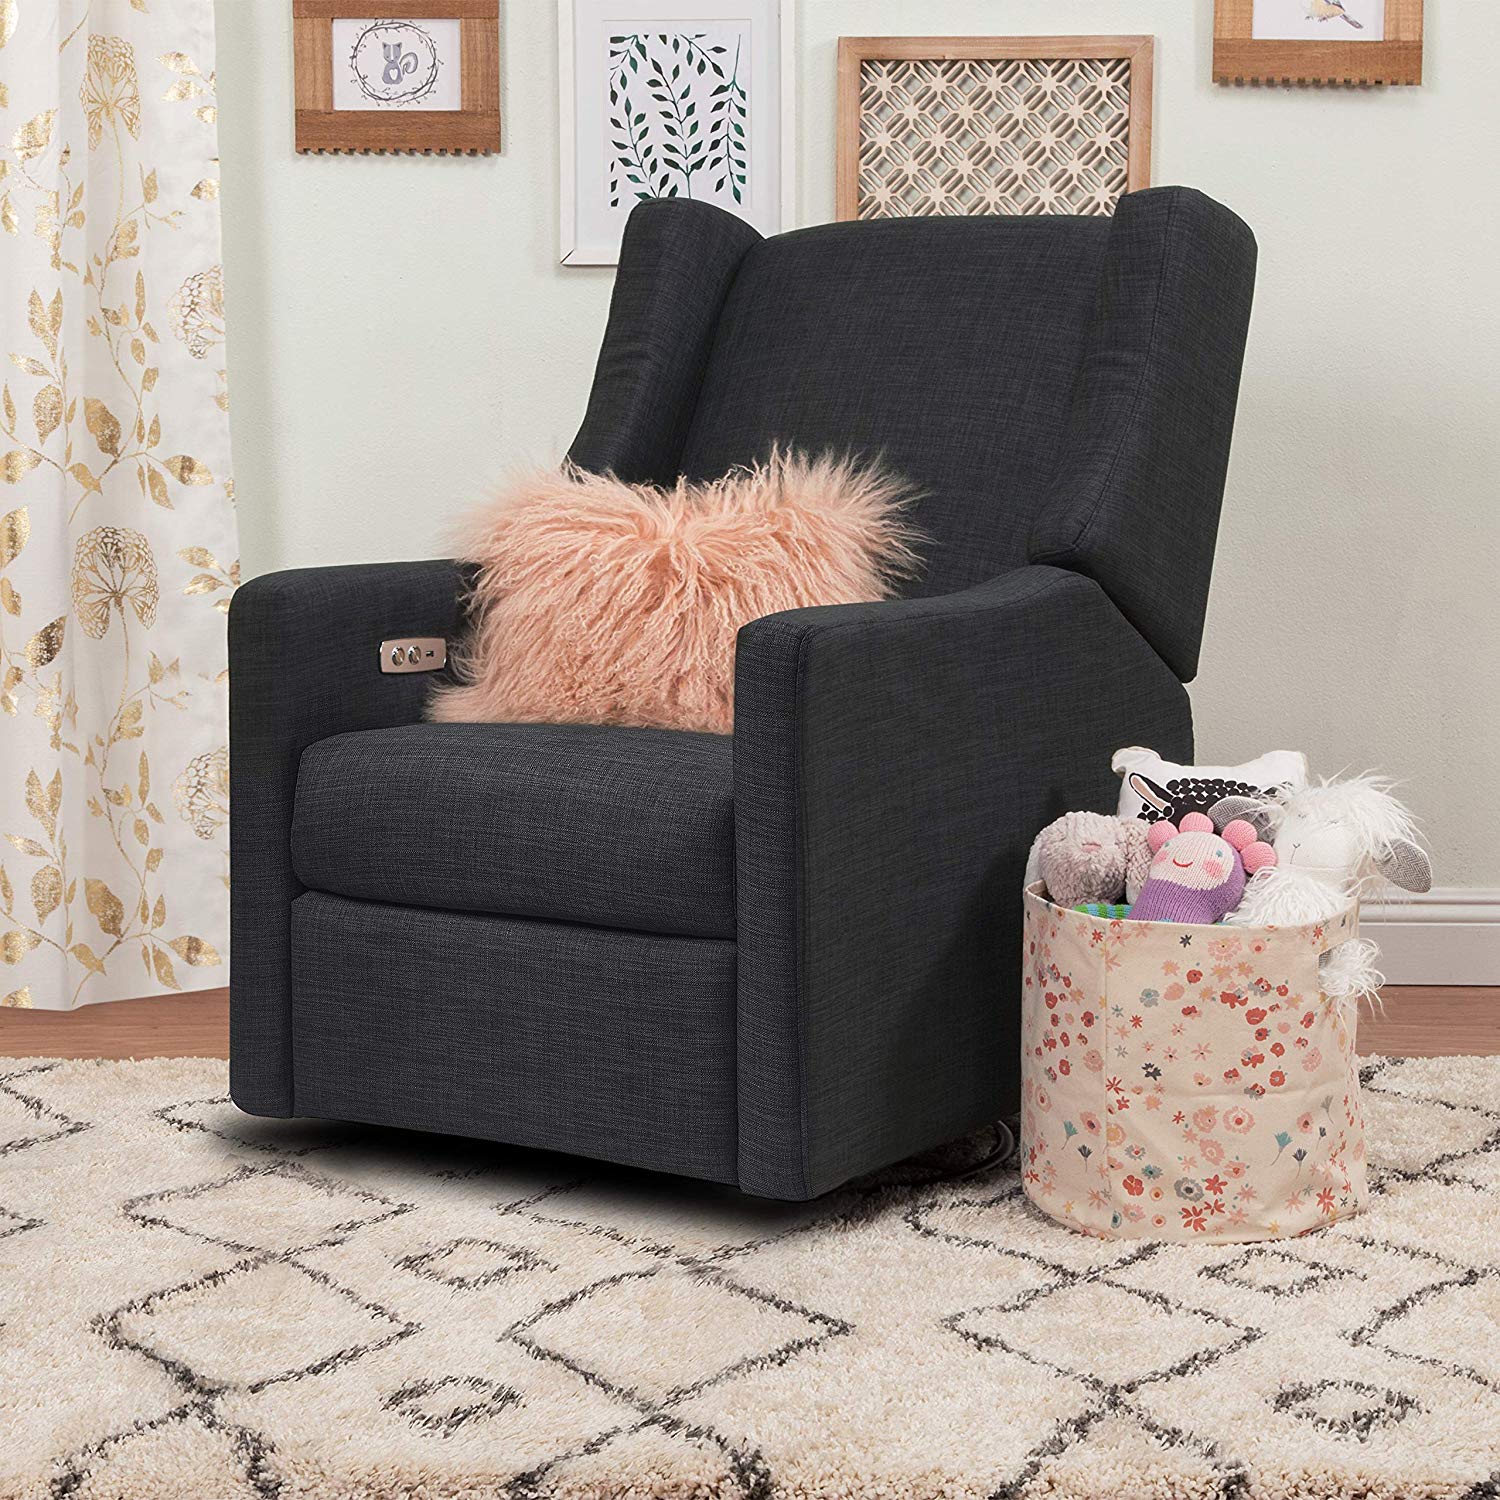 Best Glider Rocker Recliner for Nursery 2020 [Reviews and Buying Guide